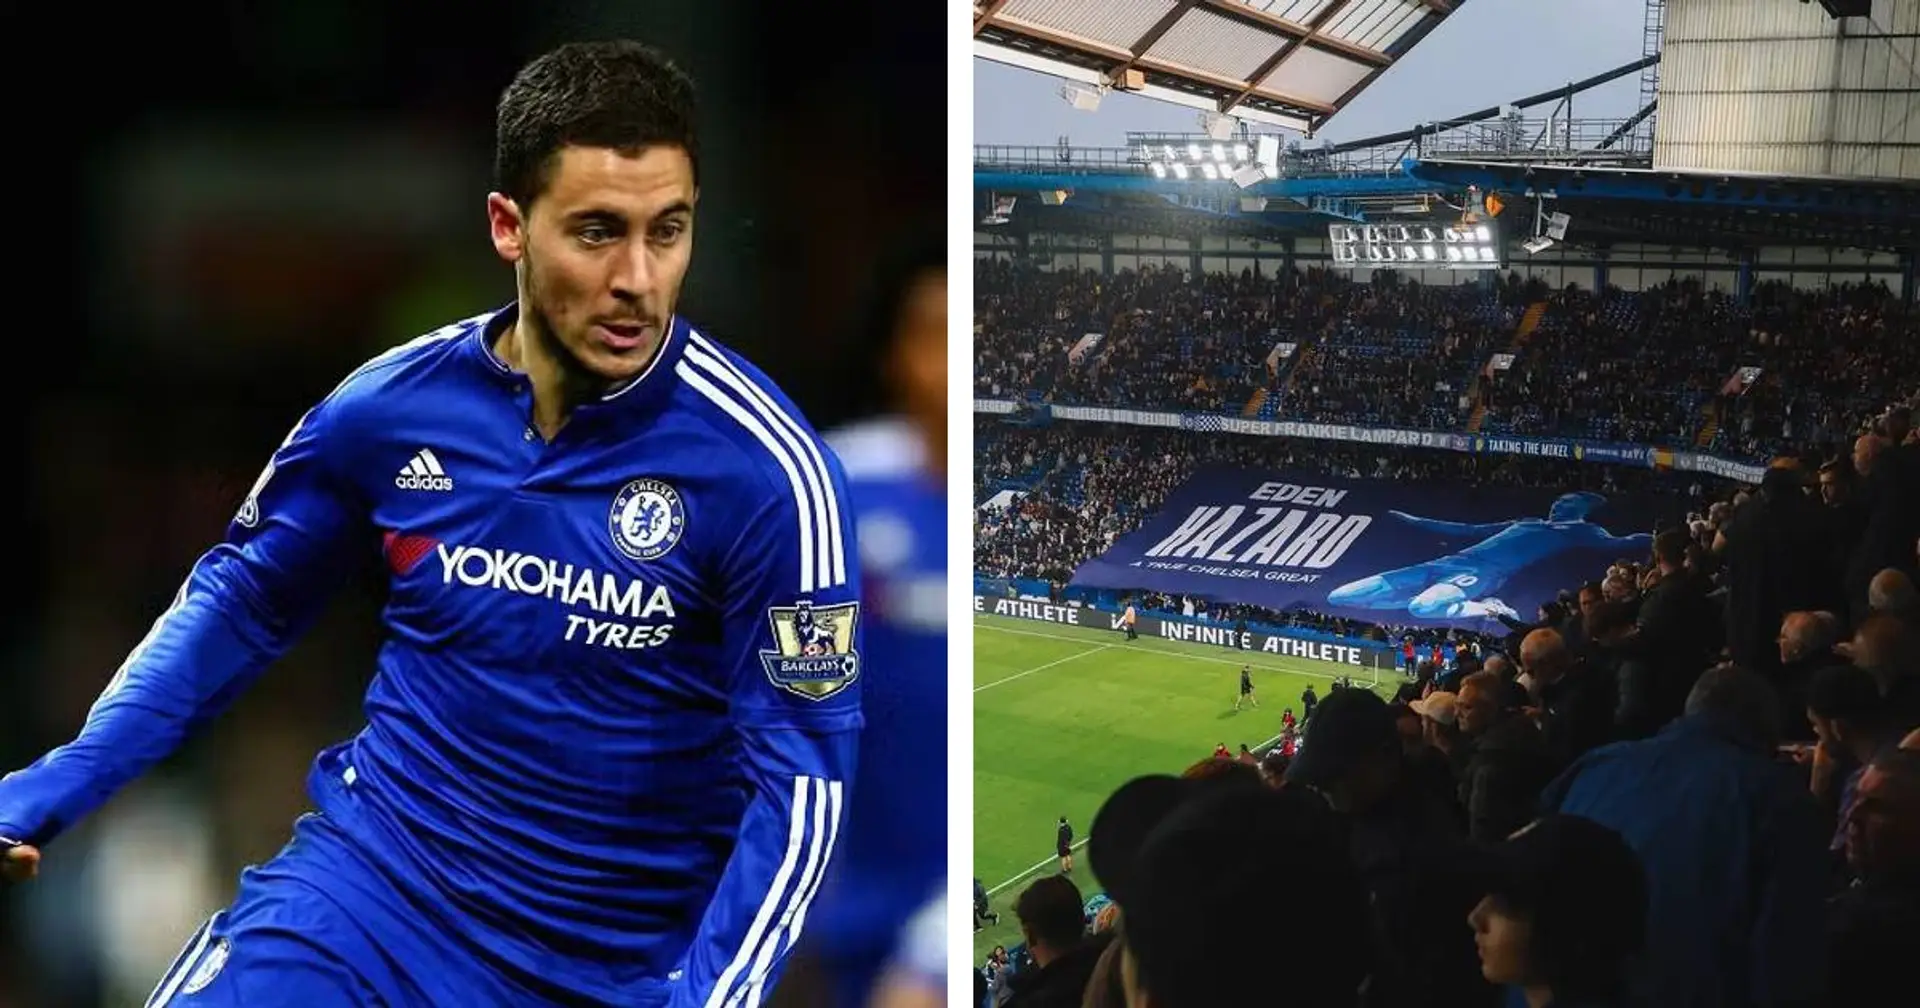 Spotted: Chelsea fans pay tribute to Eden Hazard with banner at Stamford Bridge